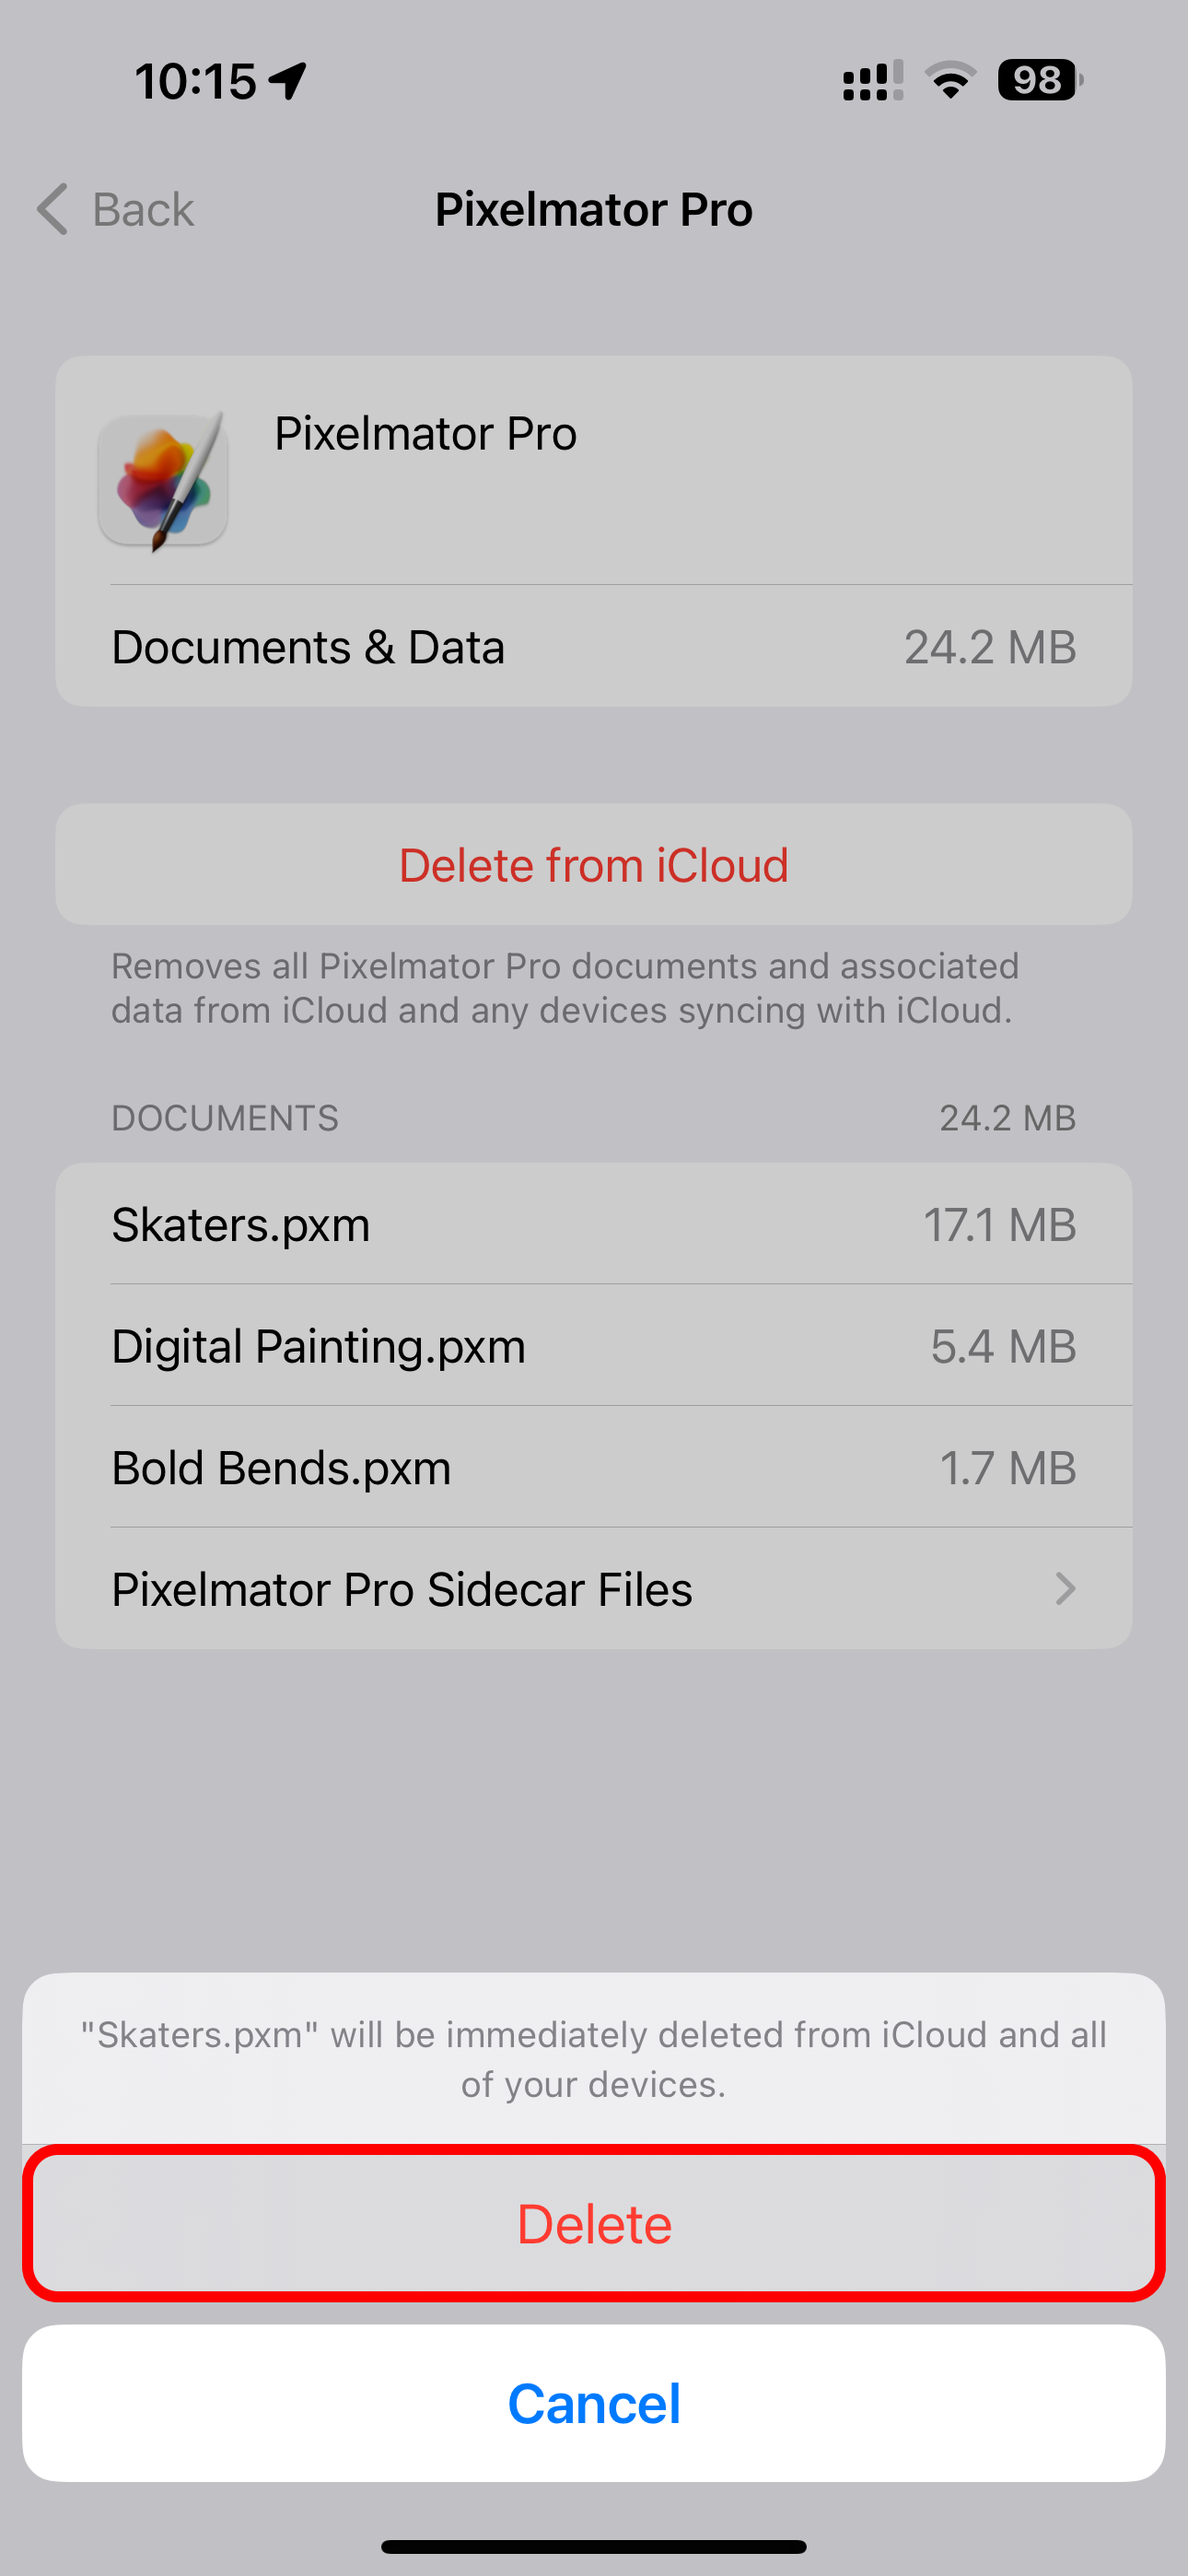 Confirming deleting a file from iCloud for Pixelmator Pro file in Settings on iPhone.